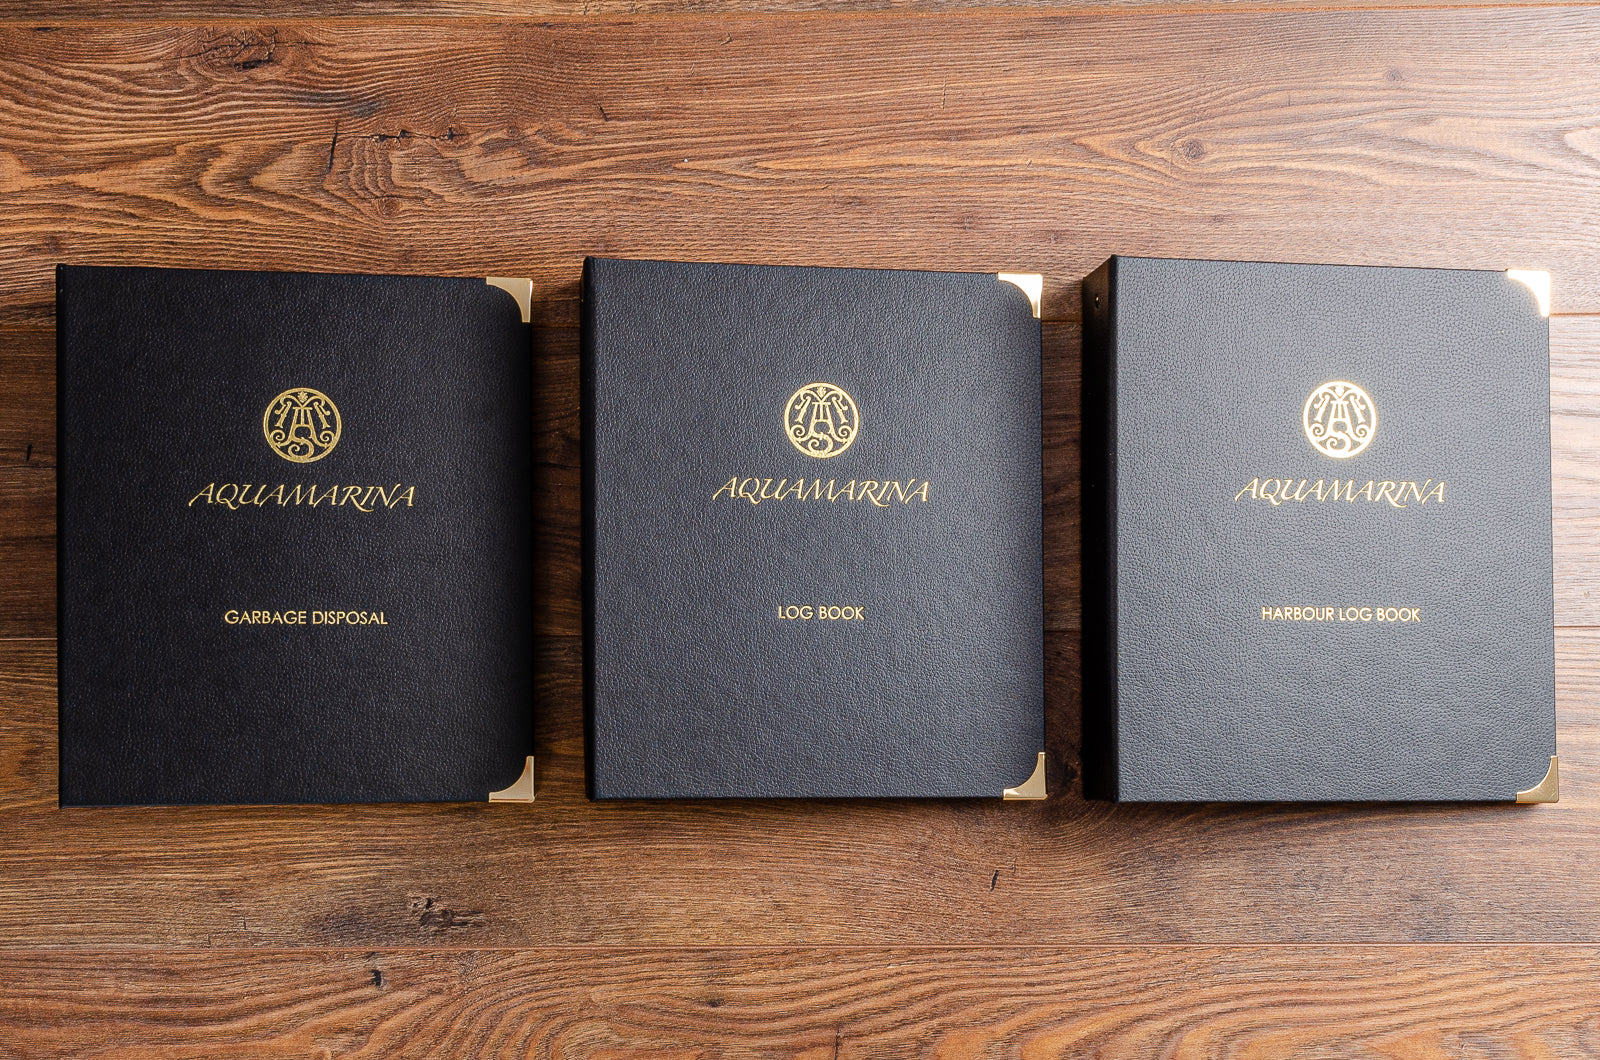 Luxury ring binders for super yacht, log book and harbour log book in faux leather with gold edgings and gold foil personalisation